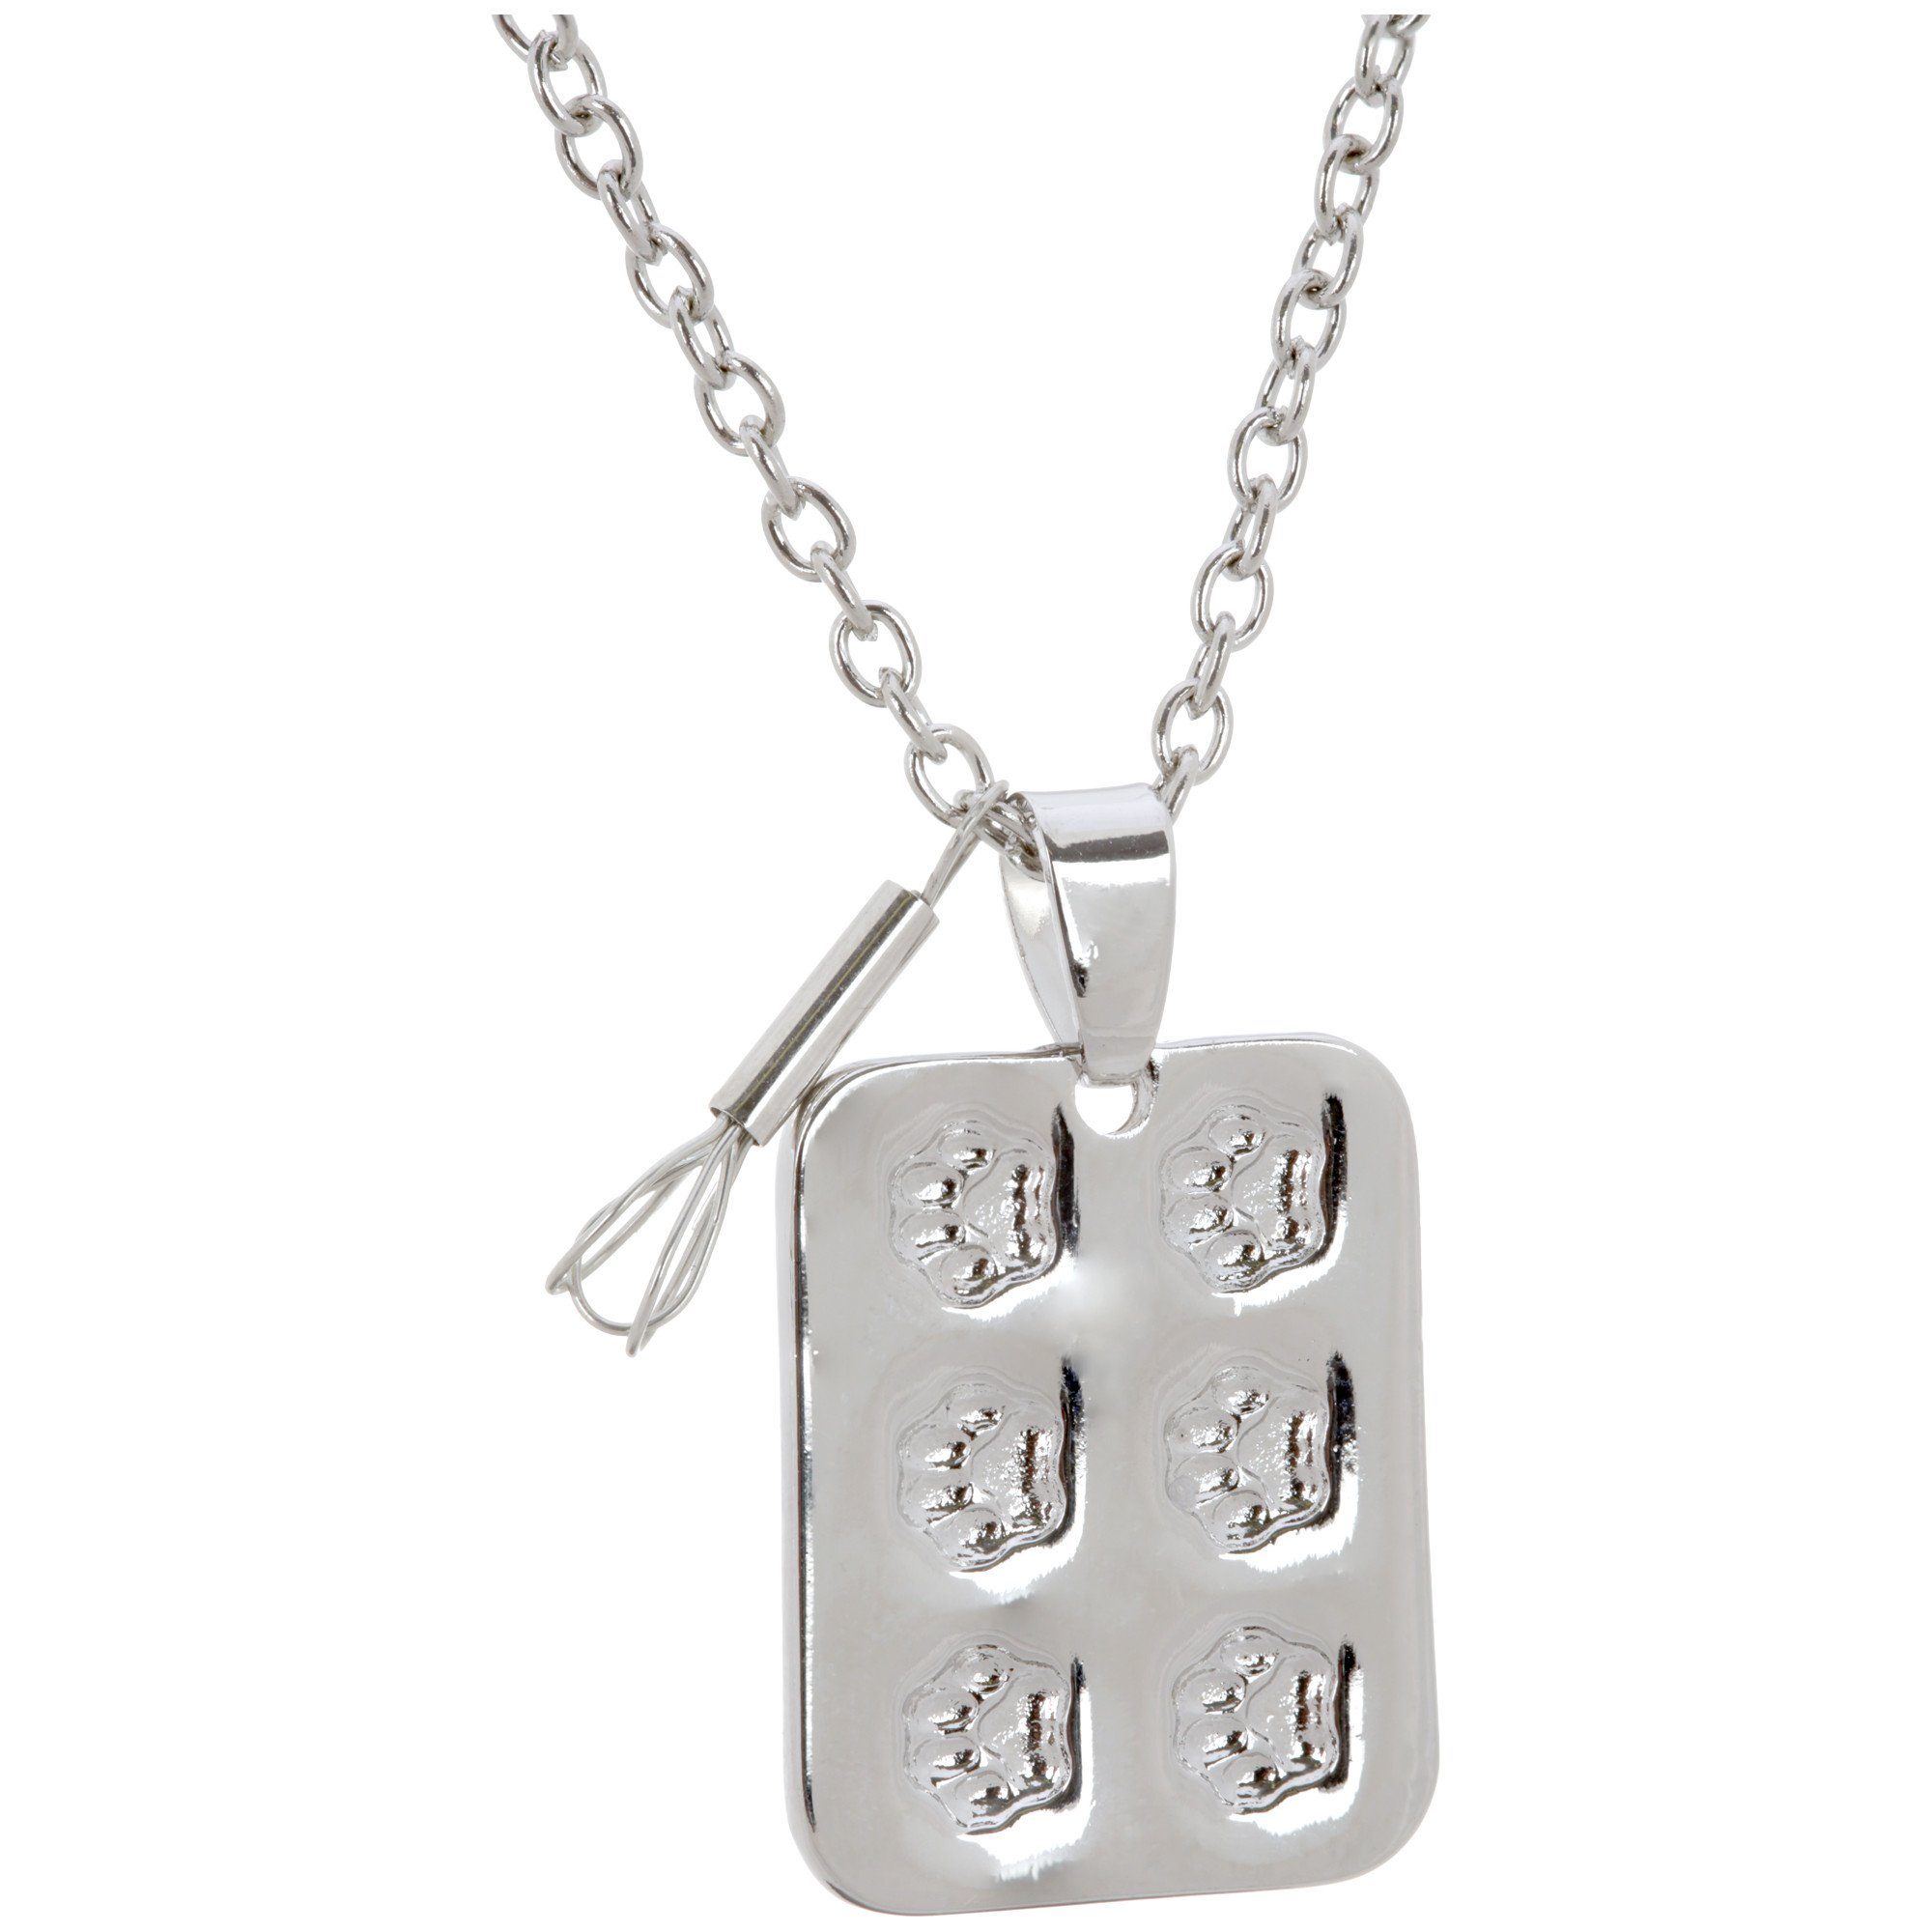 Paws To Bake Muffin Pan Necklace - Single